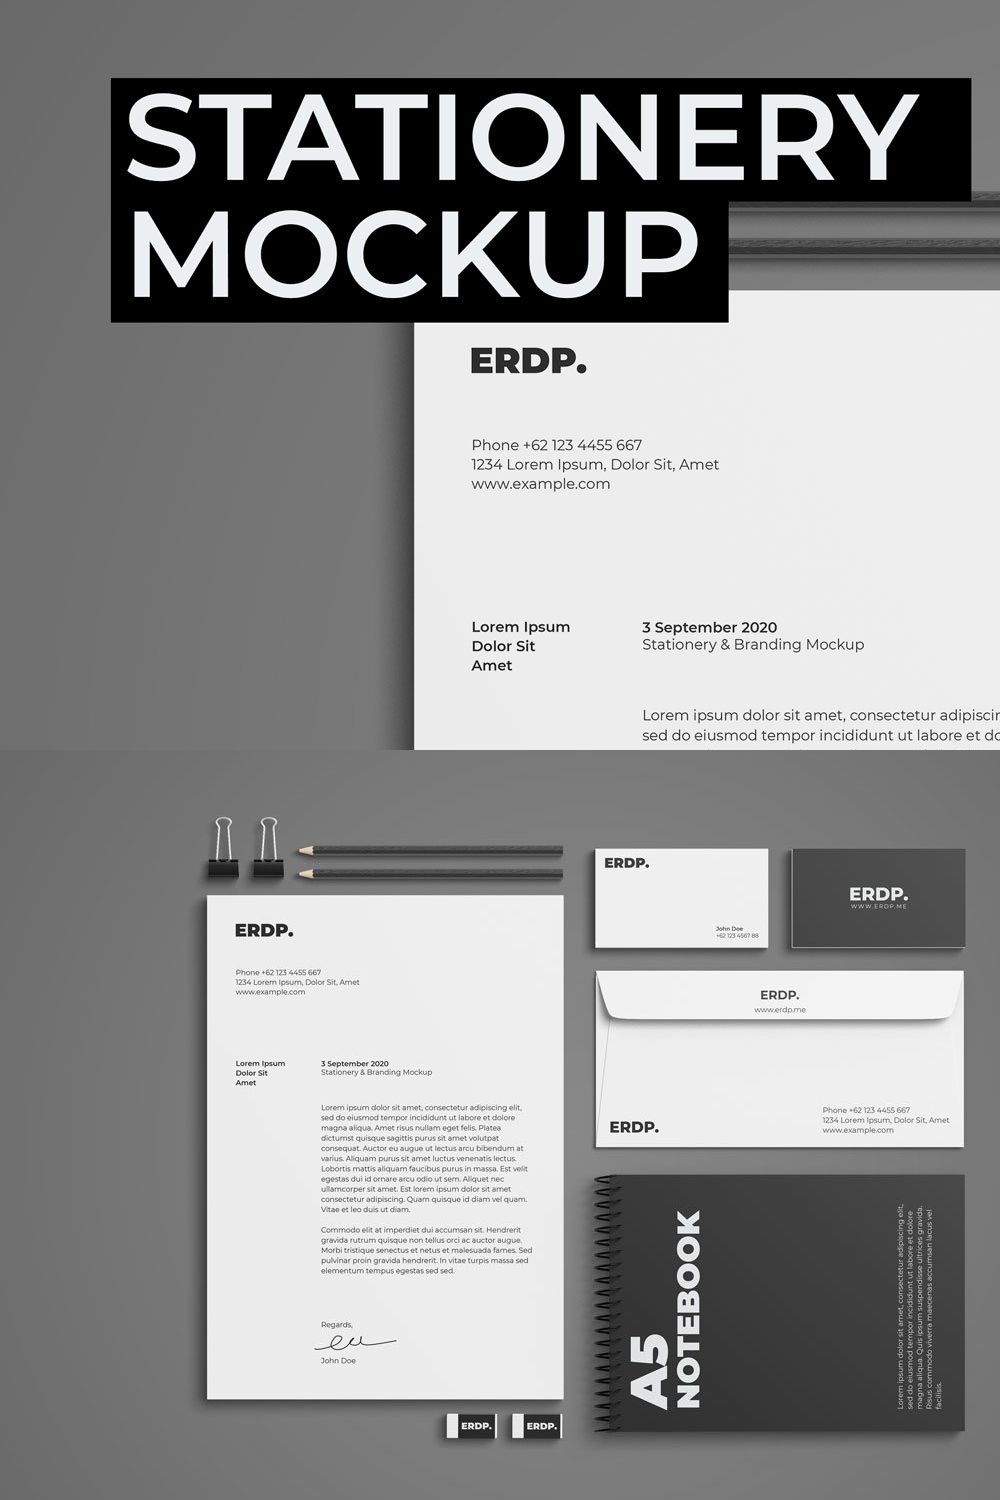 Stationery Mockup Photoshop template pinterest preview image.